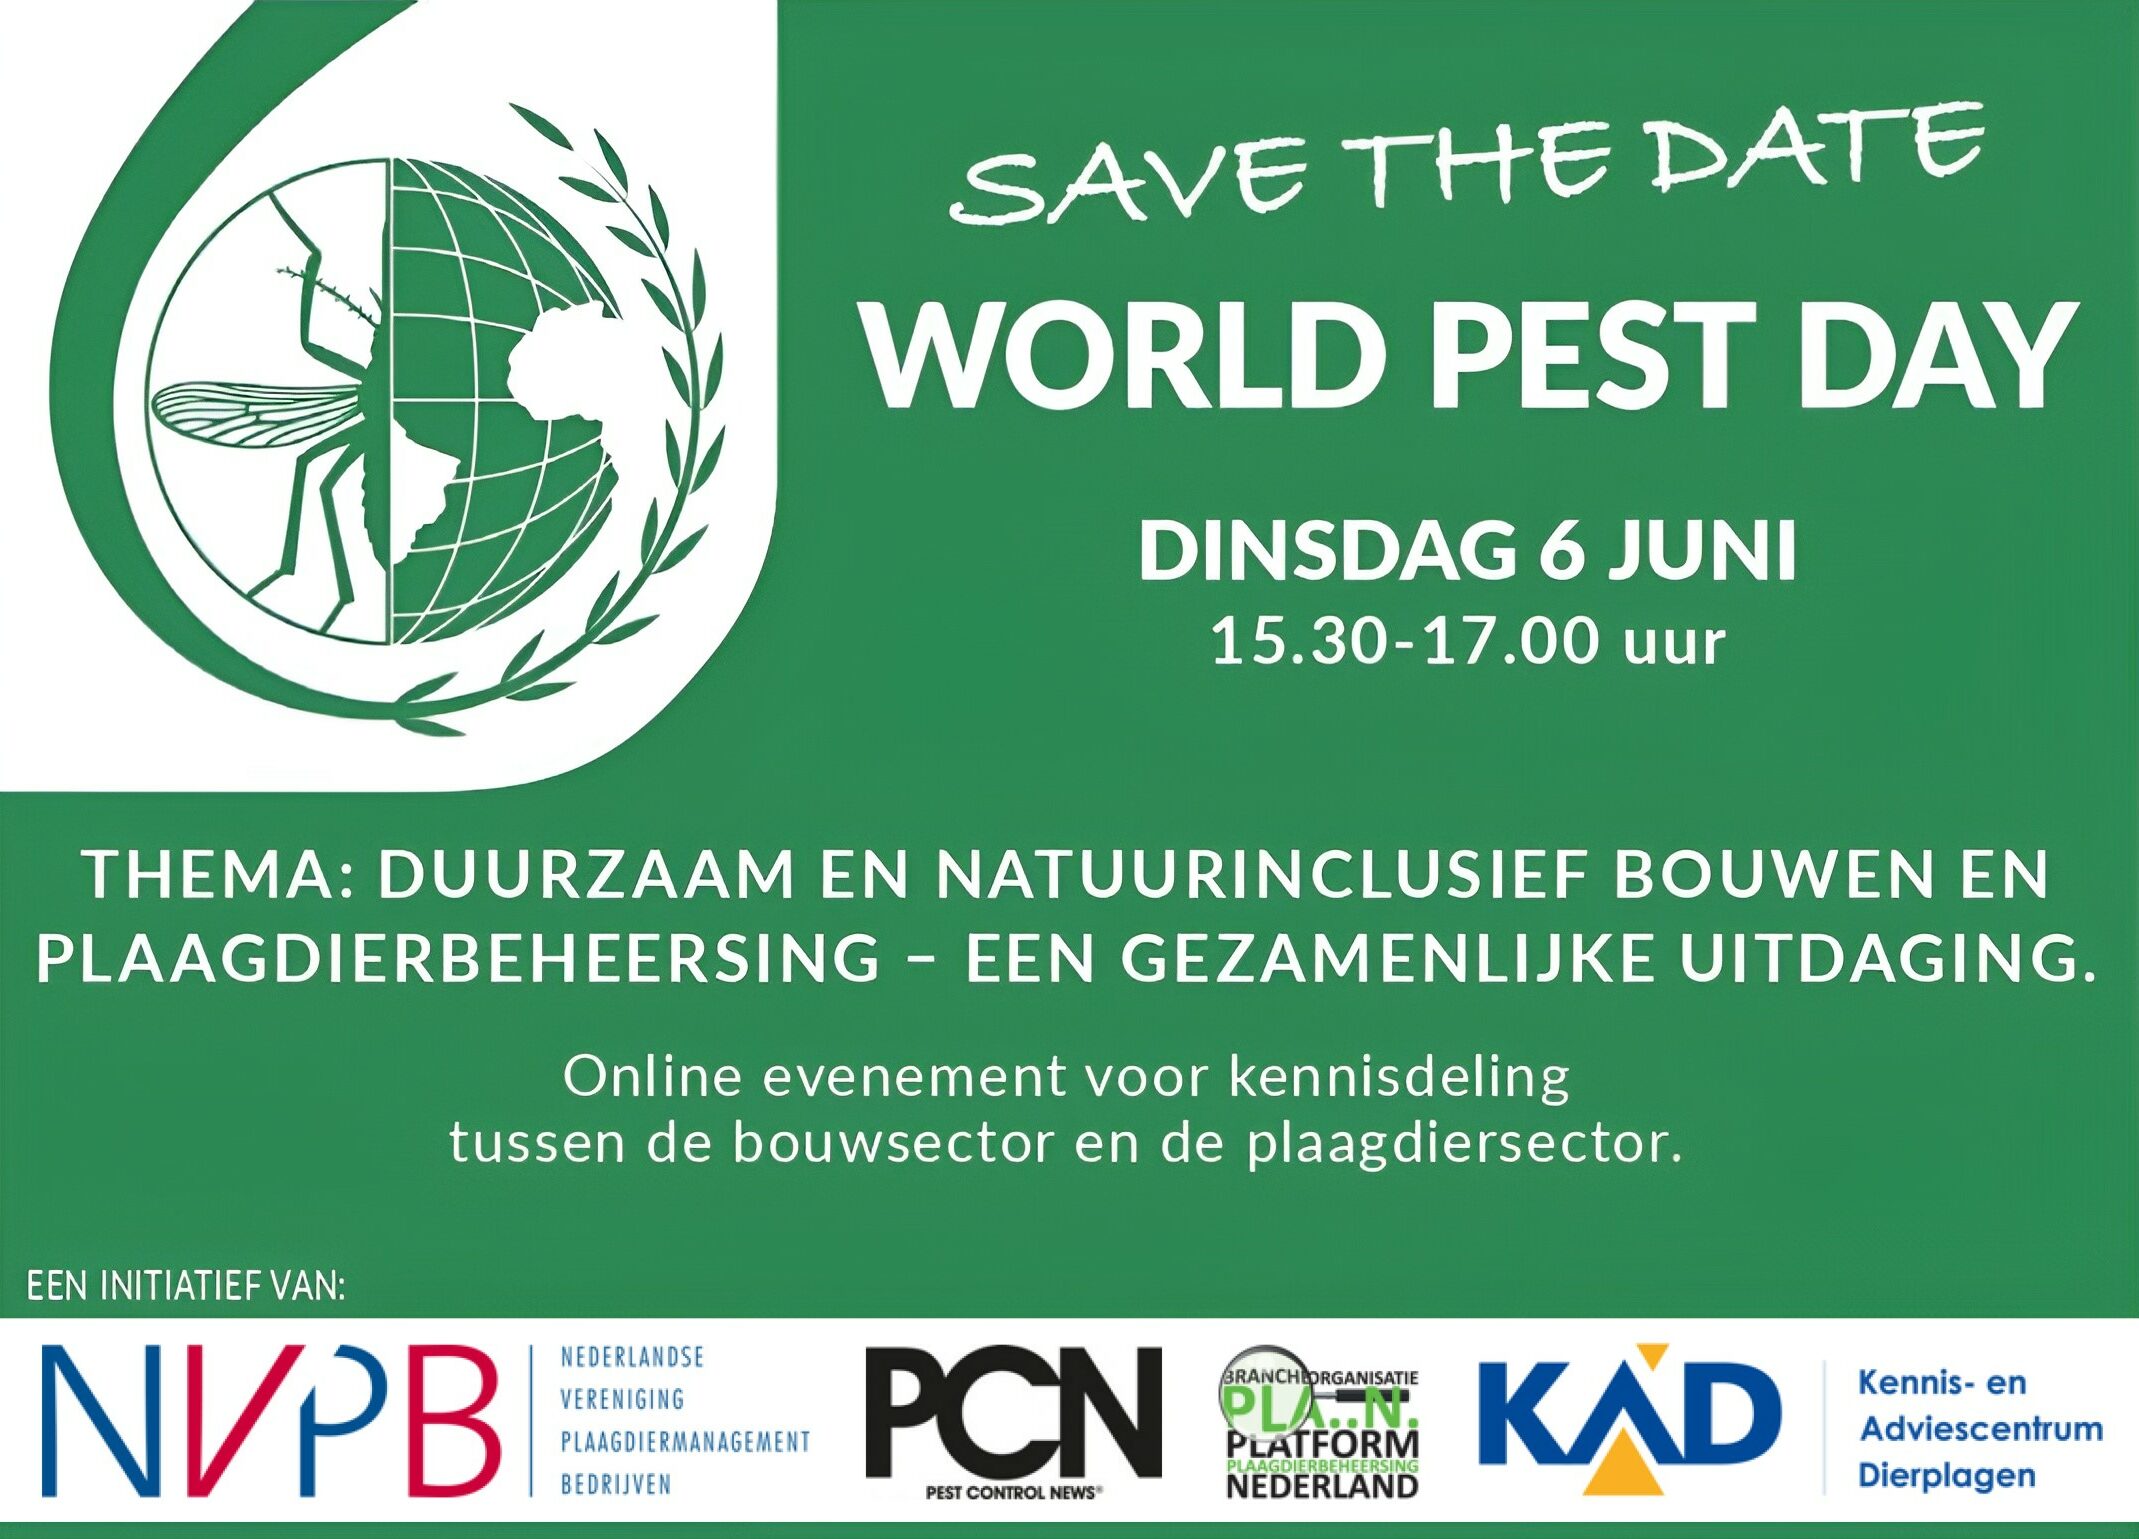 WPD - save the date